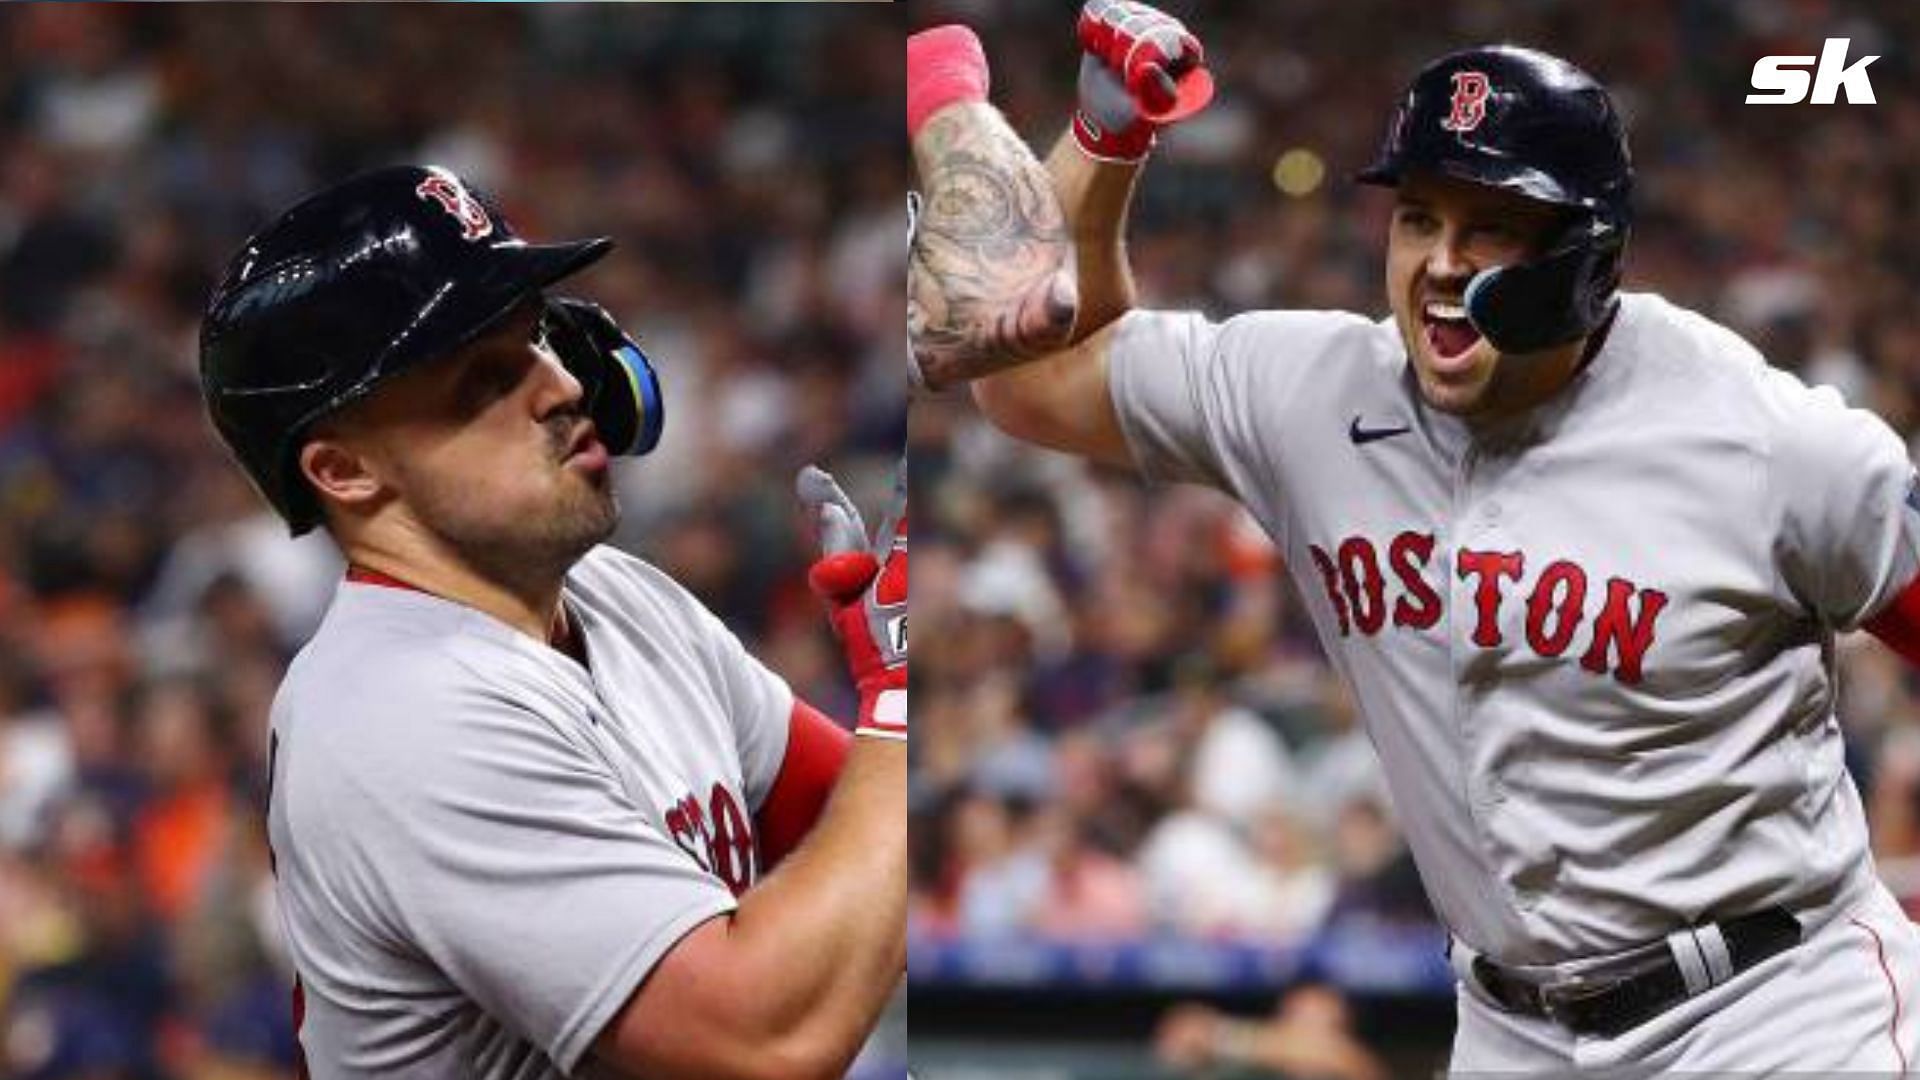 Red Sox analyst Kevin Millar predicts an Adam Duvall home run, and